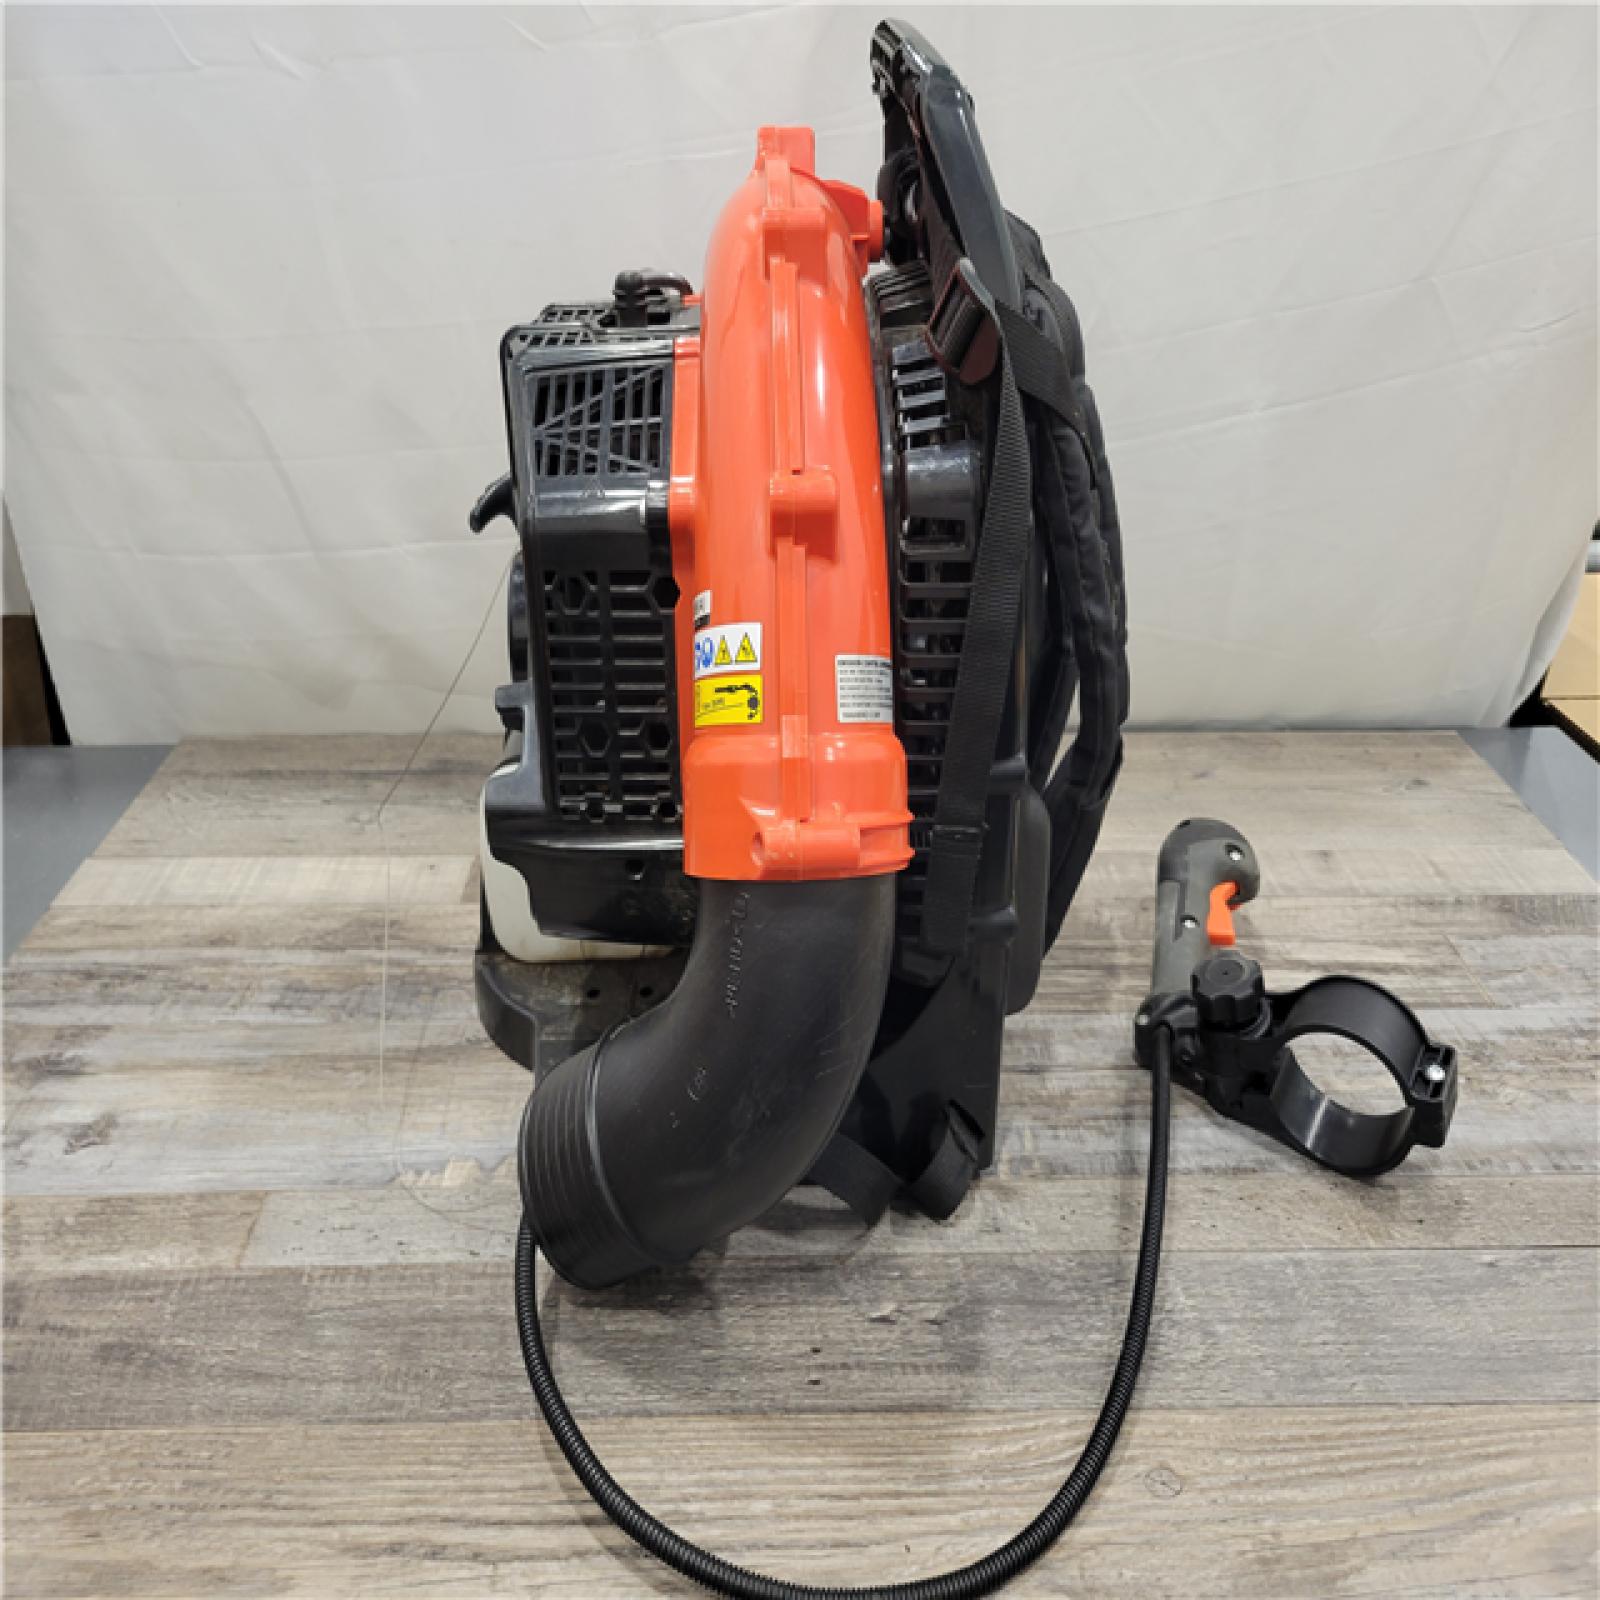 AS-IS Echo 58.2cc Gas Backpack Blower